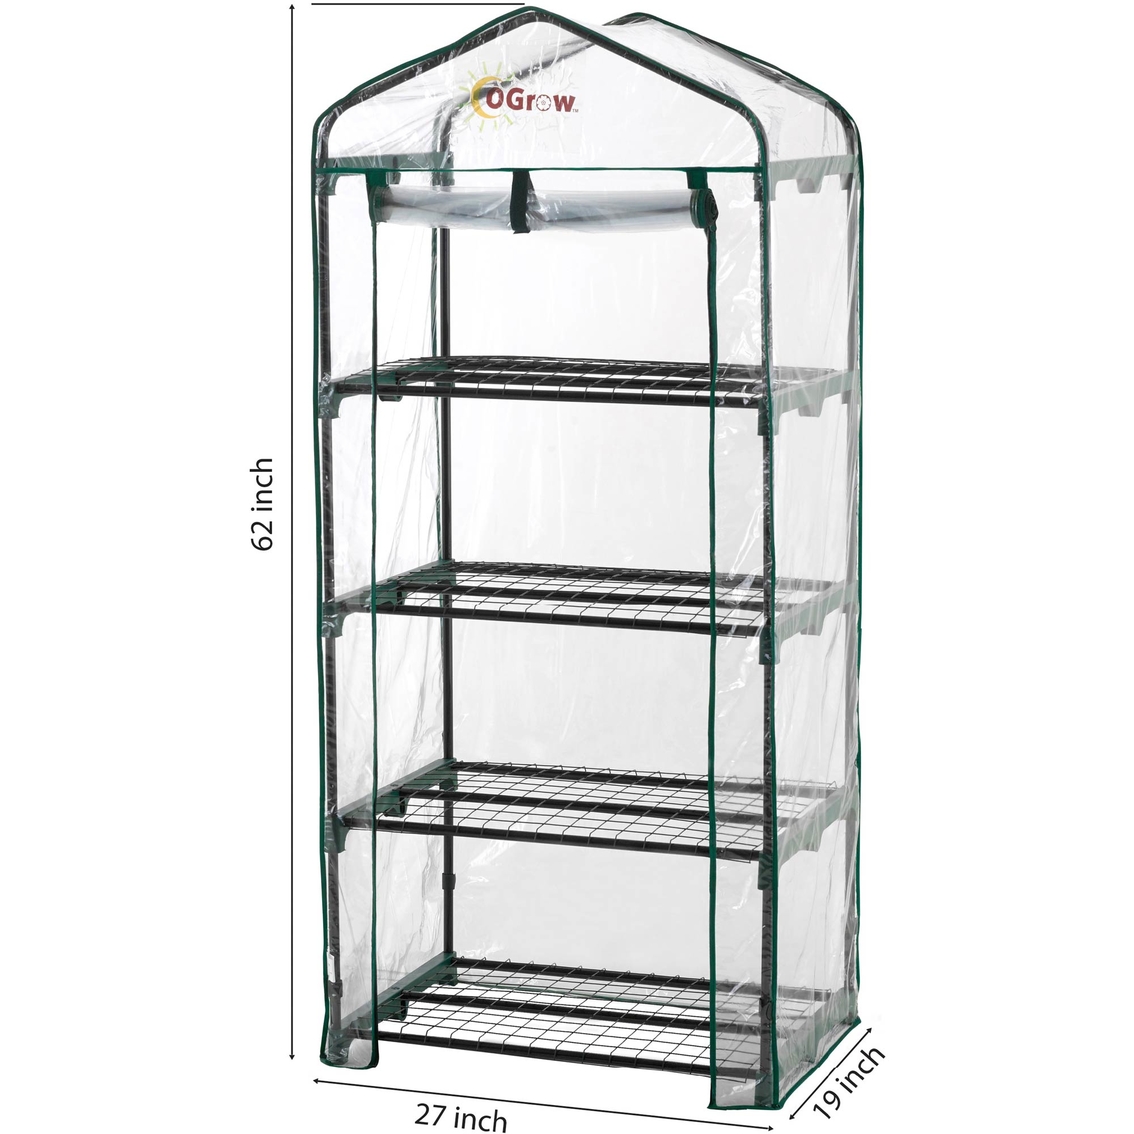 Ogrow Ultra Deluxe 4 Tier Portable Bloomhouse - Image 7 of 7